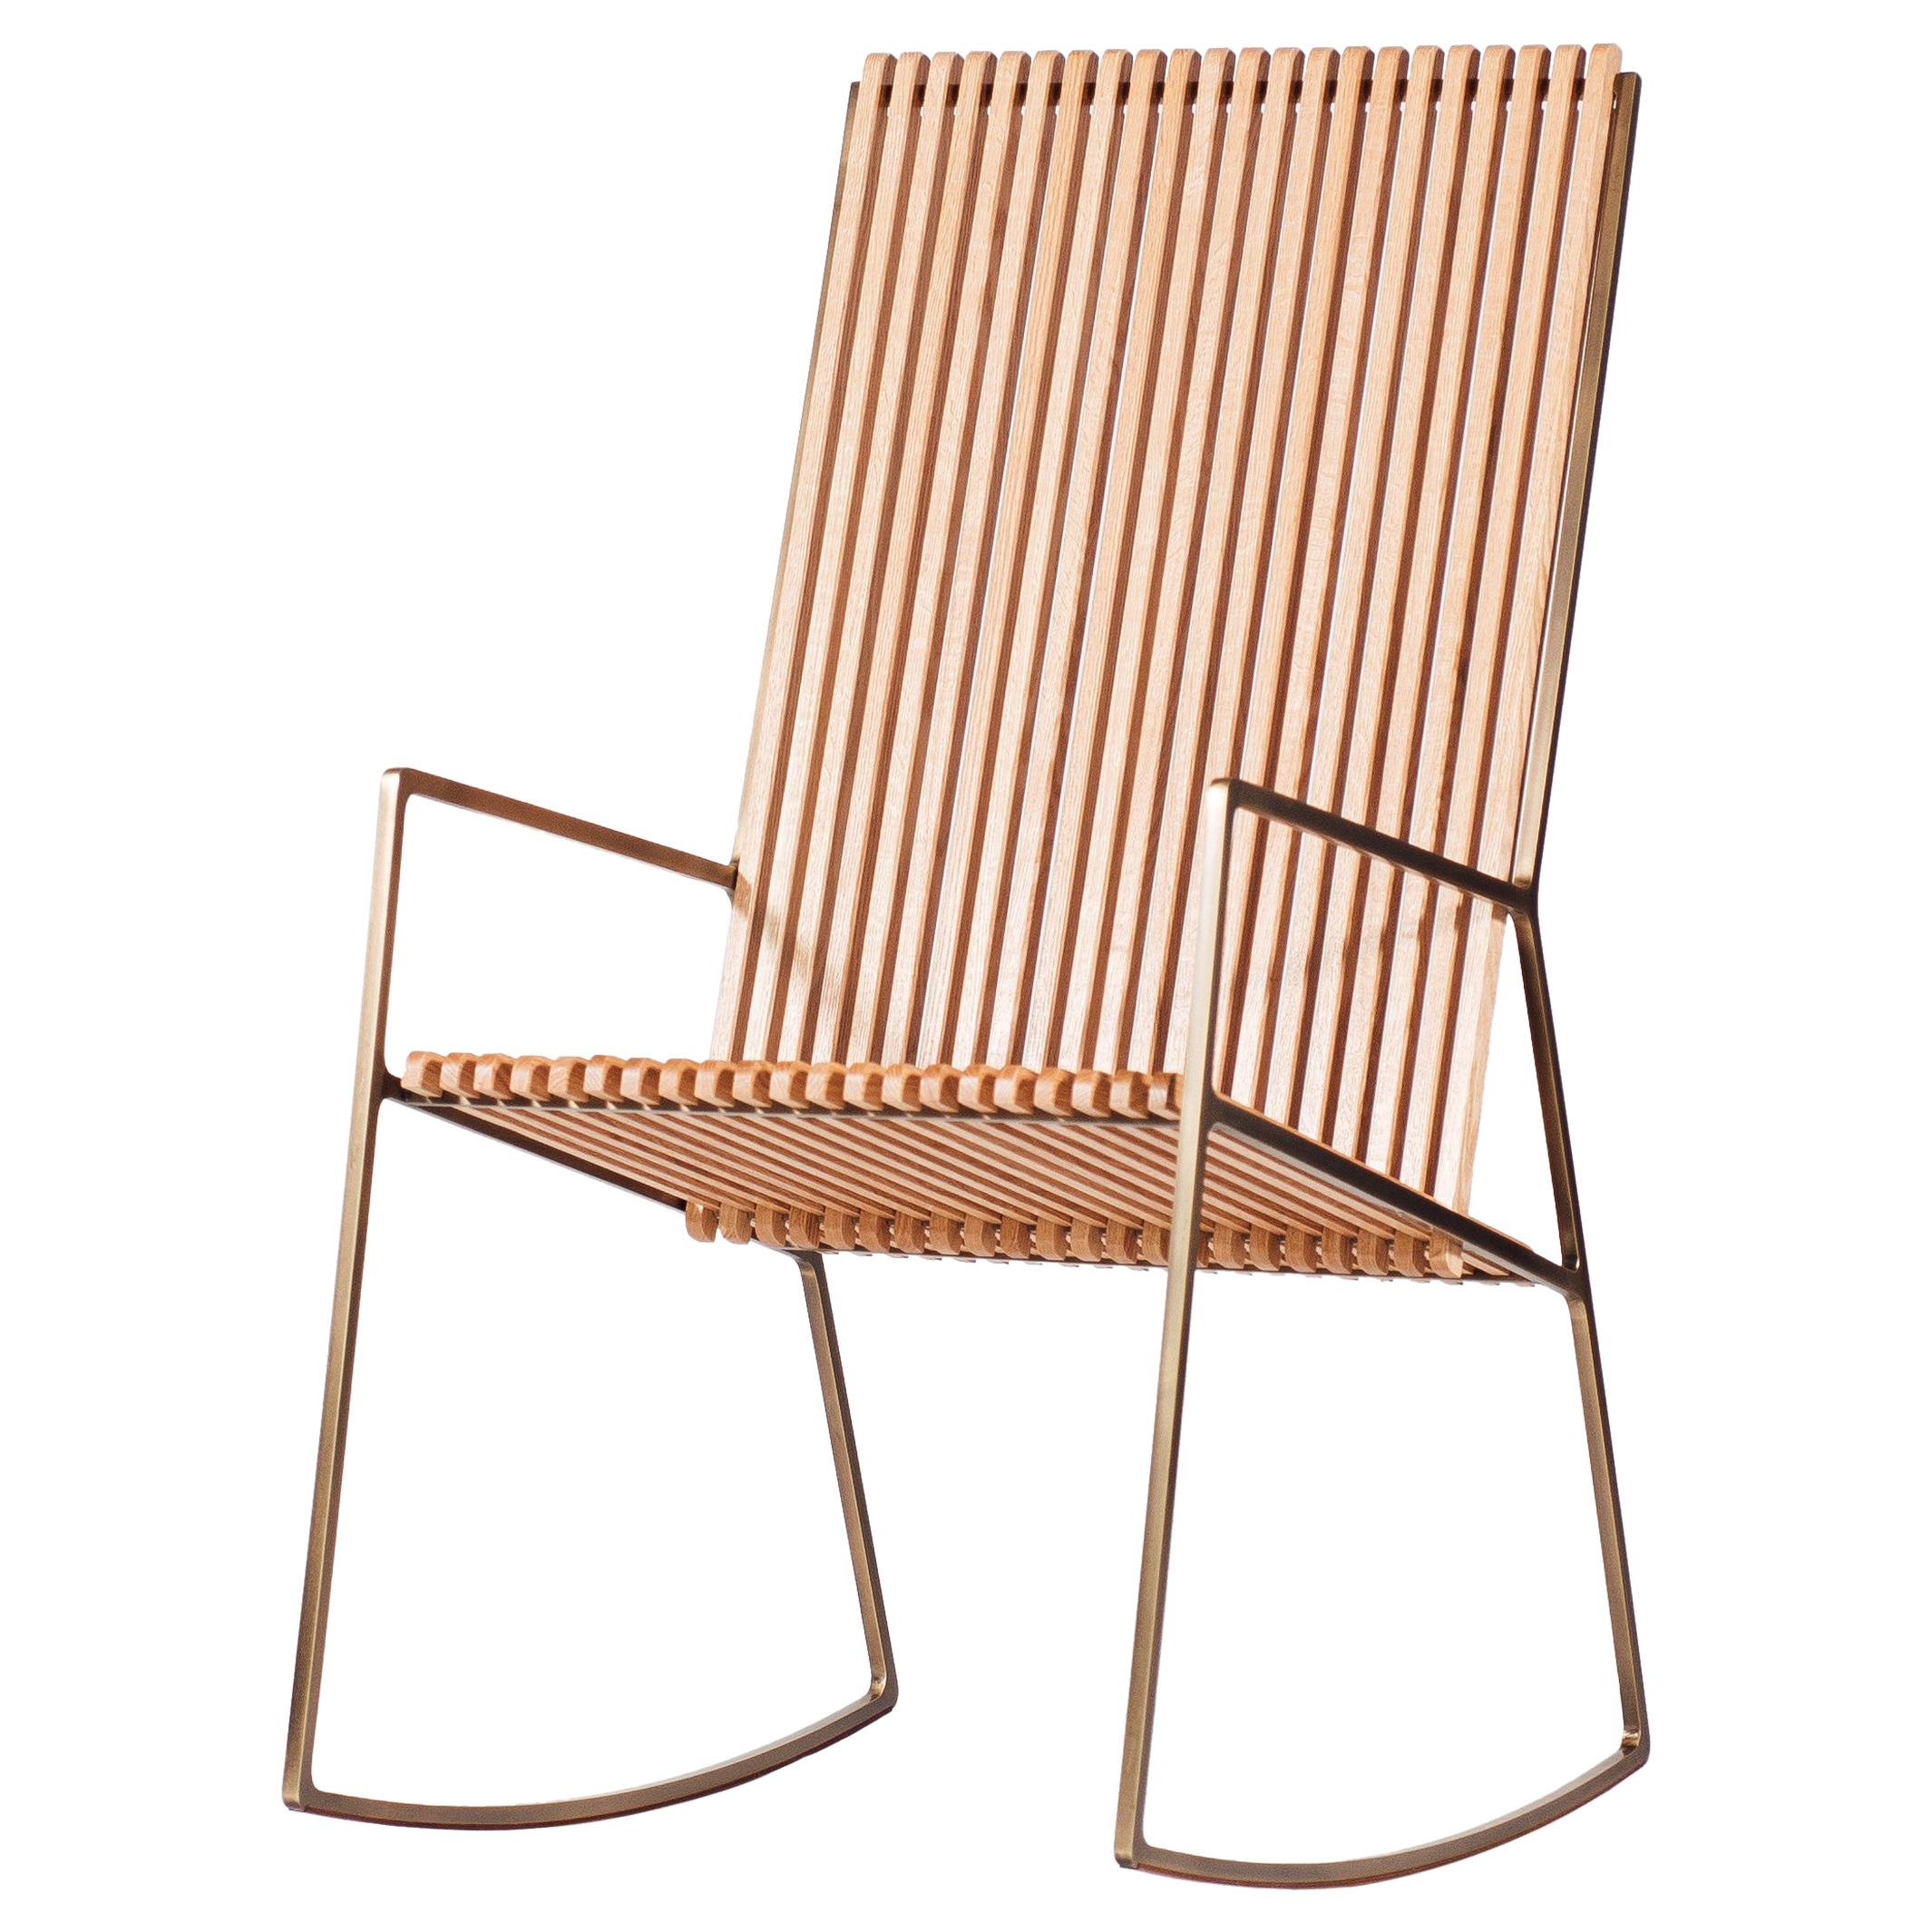 Rocking Chair in Laser-Cut Burnish Brass Plated Steel and Oak Slats